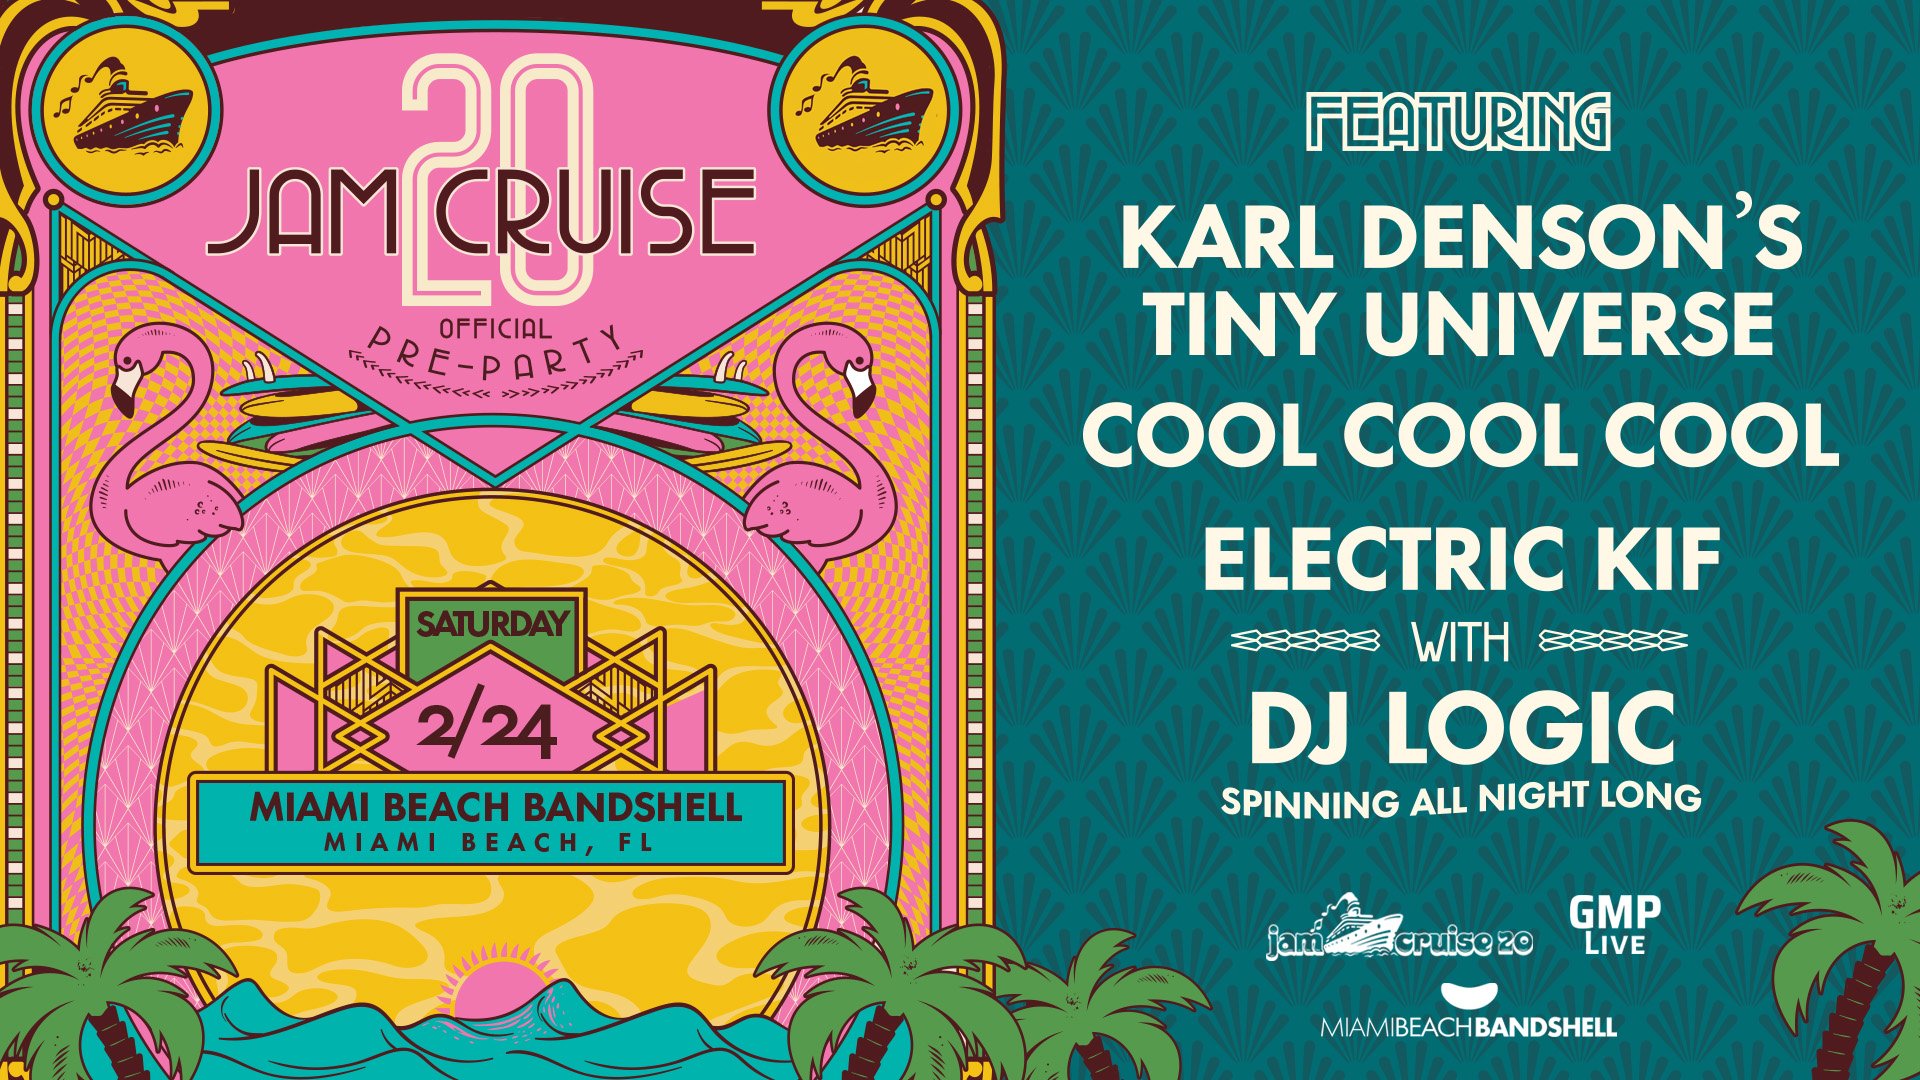 Jam Cruise 20 Official Pre-Party feat. Karl Denson's Tiny Universe